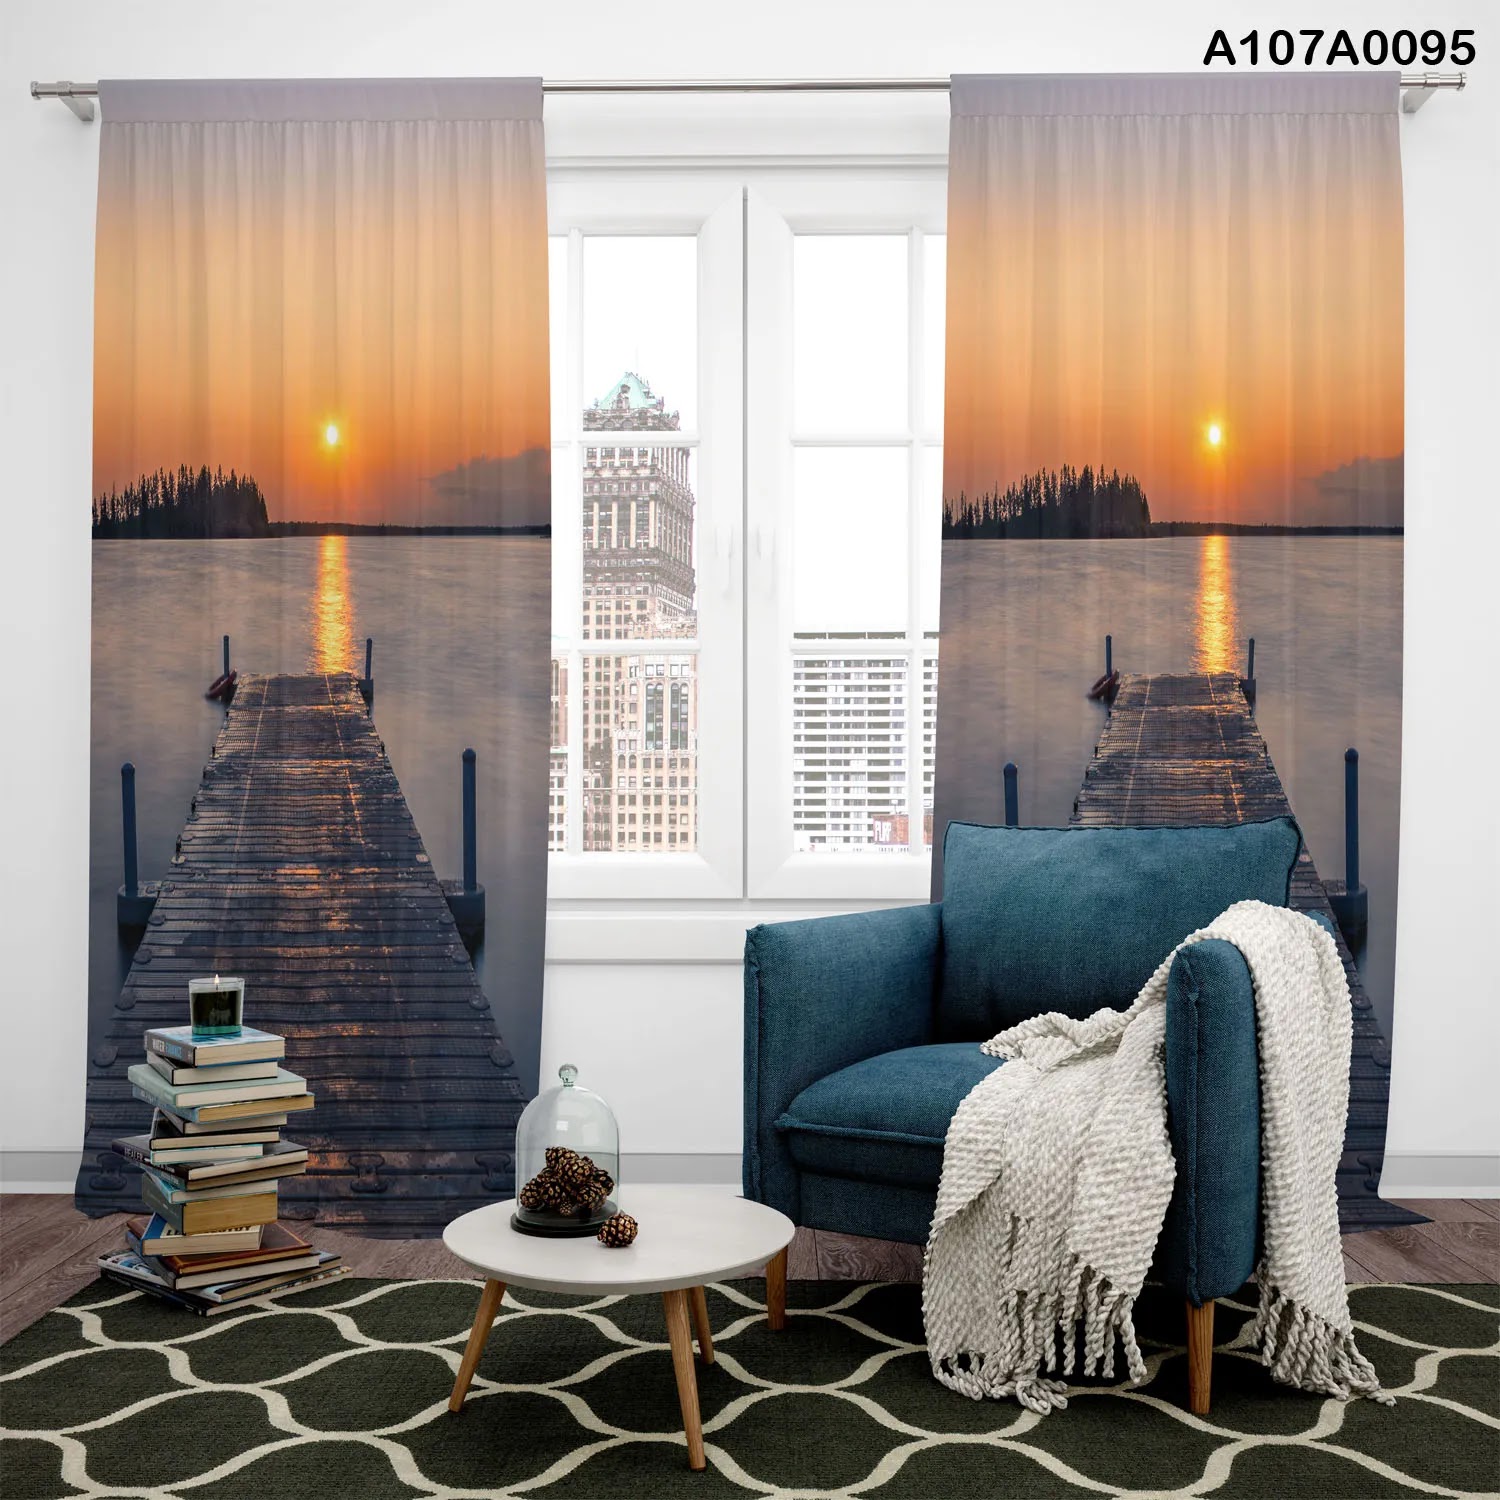 Curtains with sunset view, lake and bridge